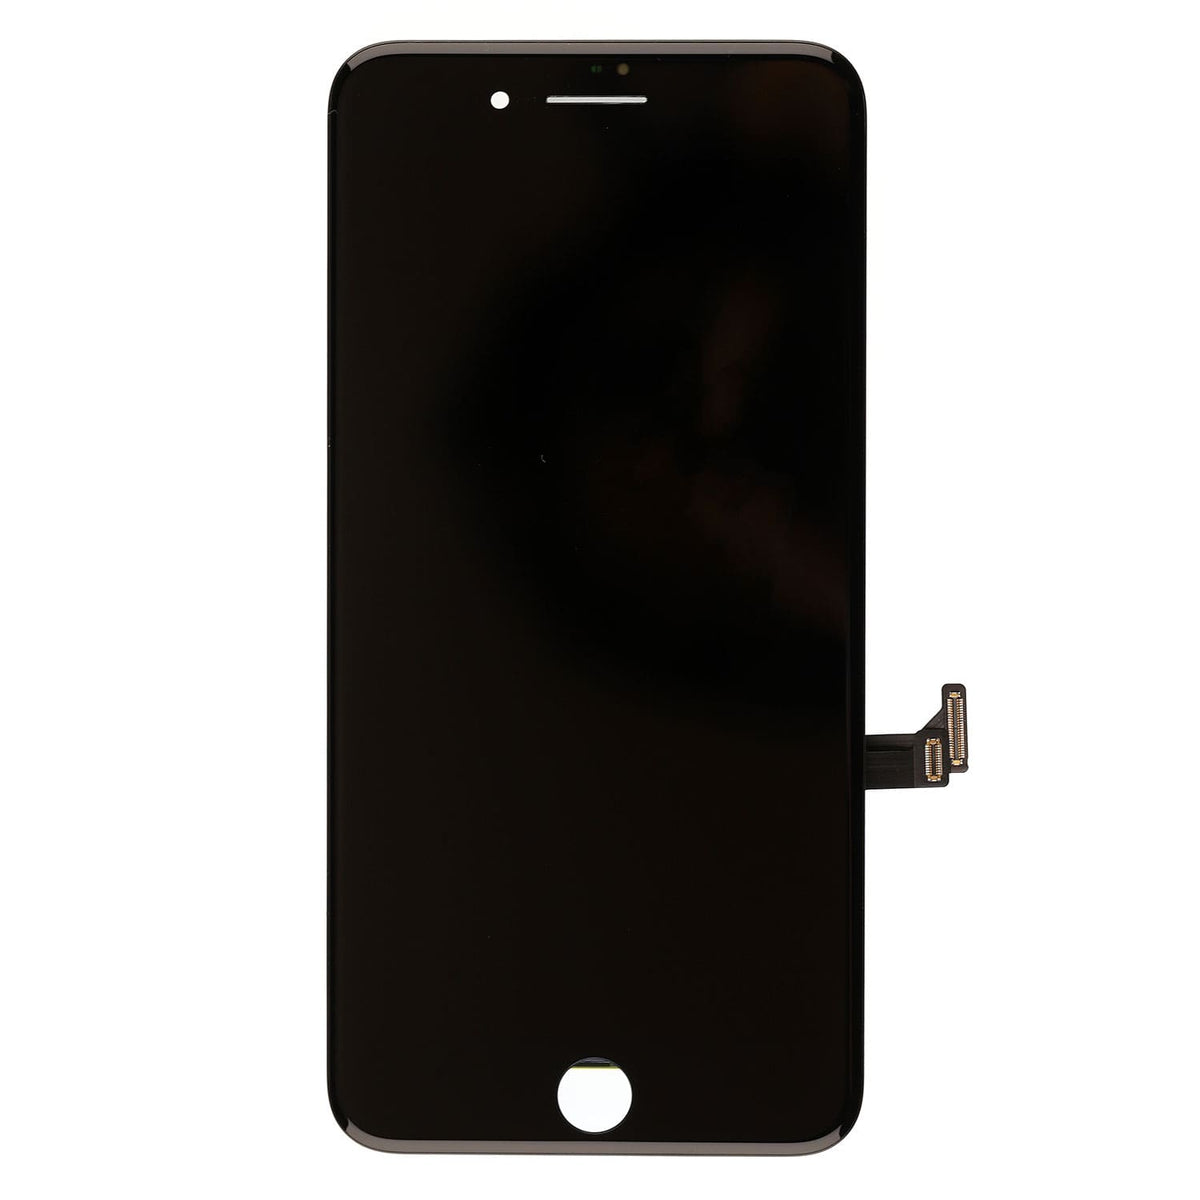 Black LCD Digitizer Assembly Replacement for iPhone 8 PLUS 